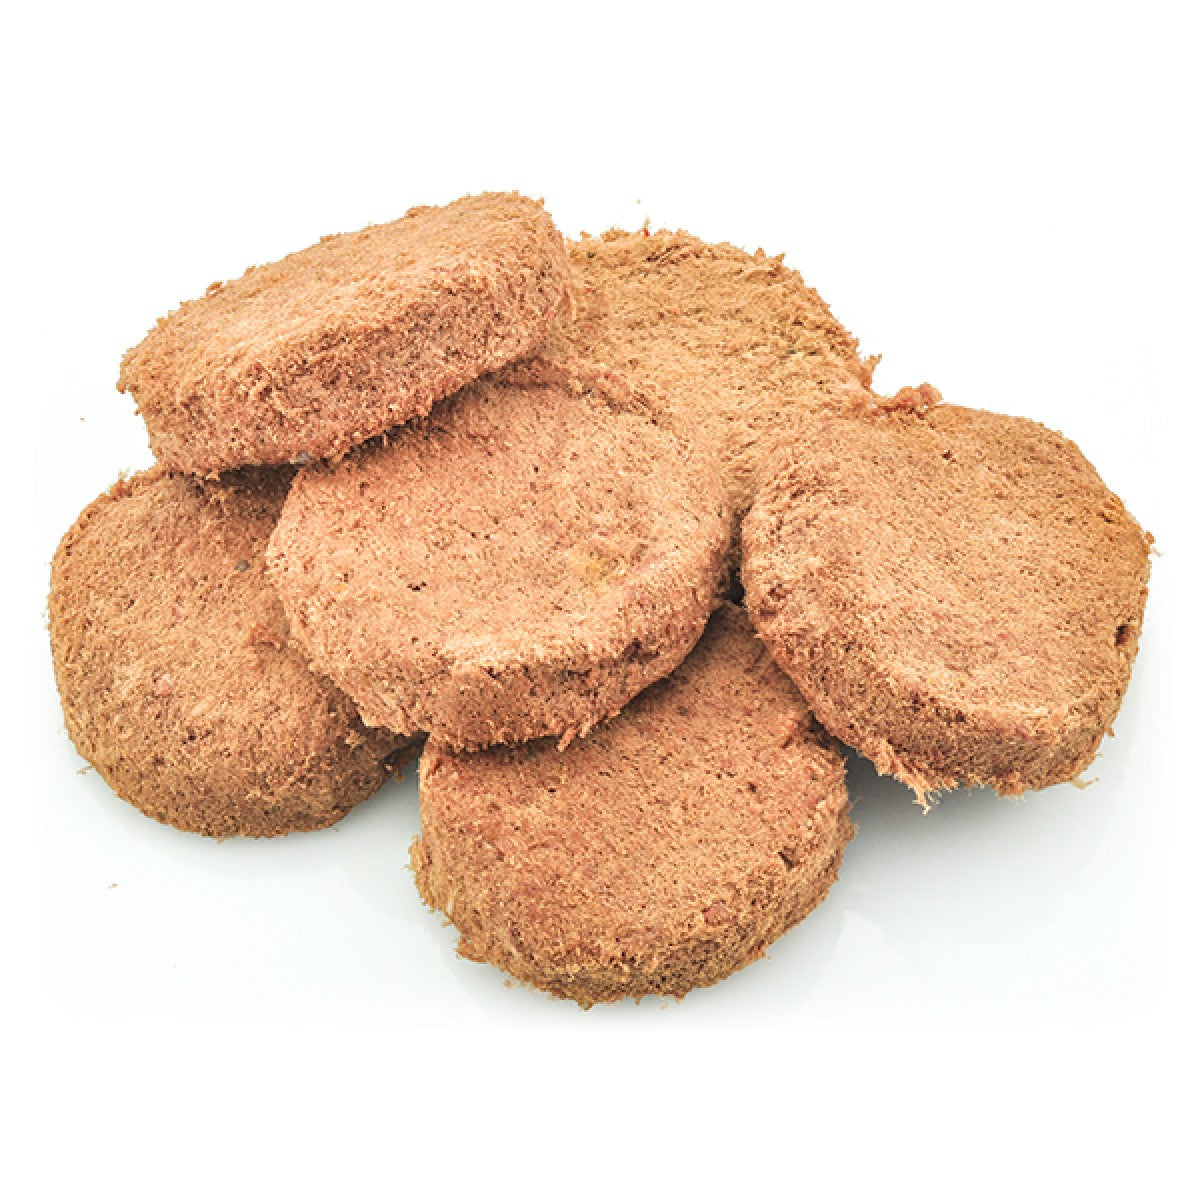 Stella & Chewy's Duck Duck Goose Dinner Patties Freeze-Dried Dog Food